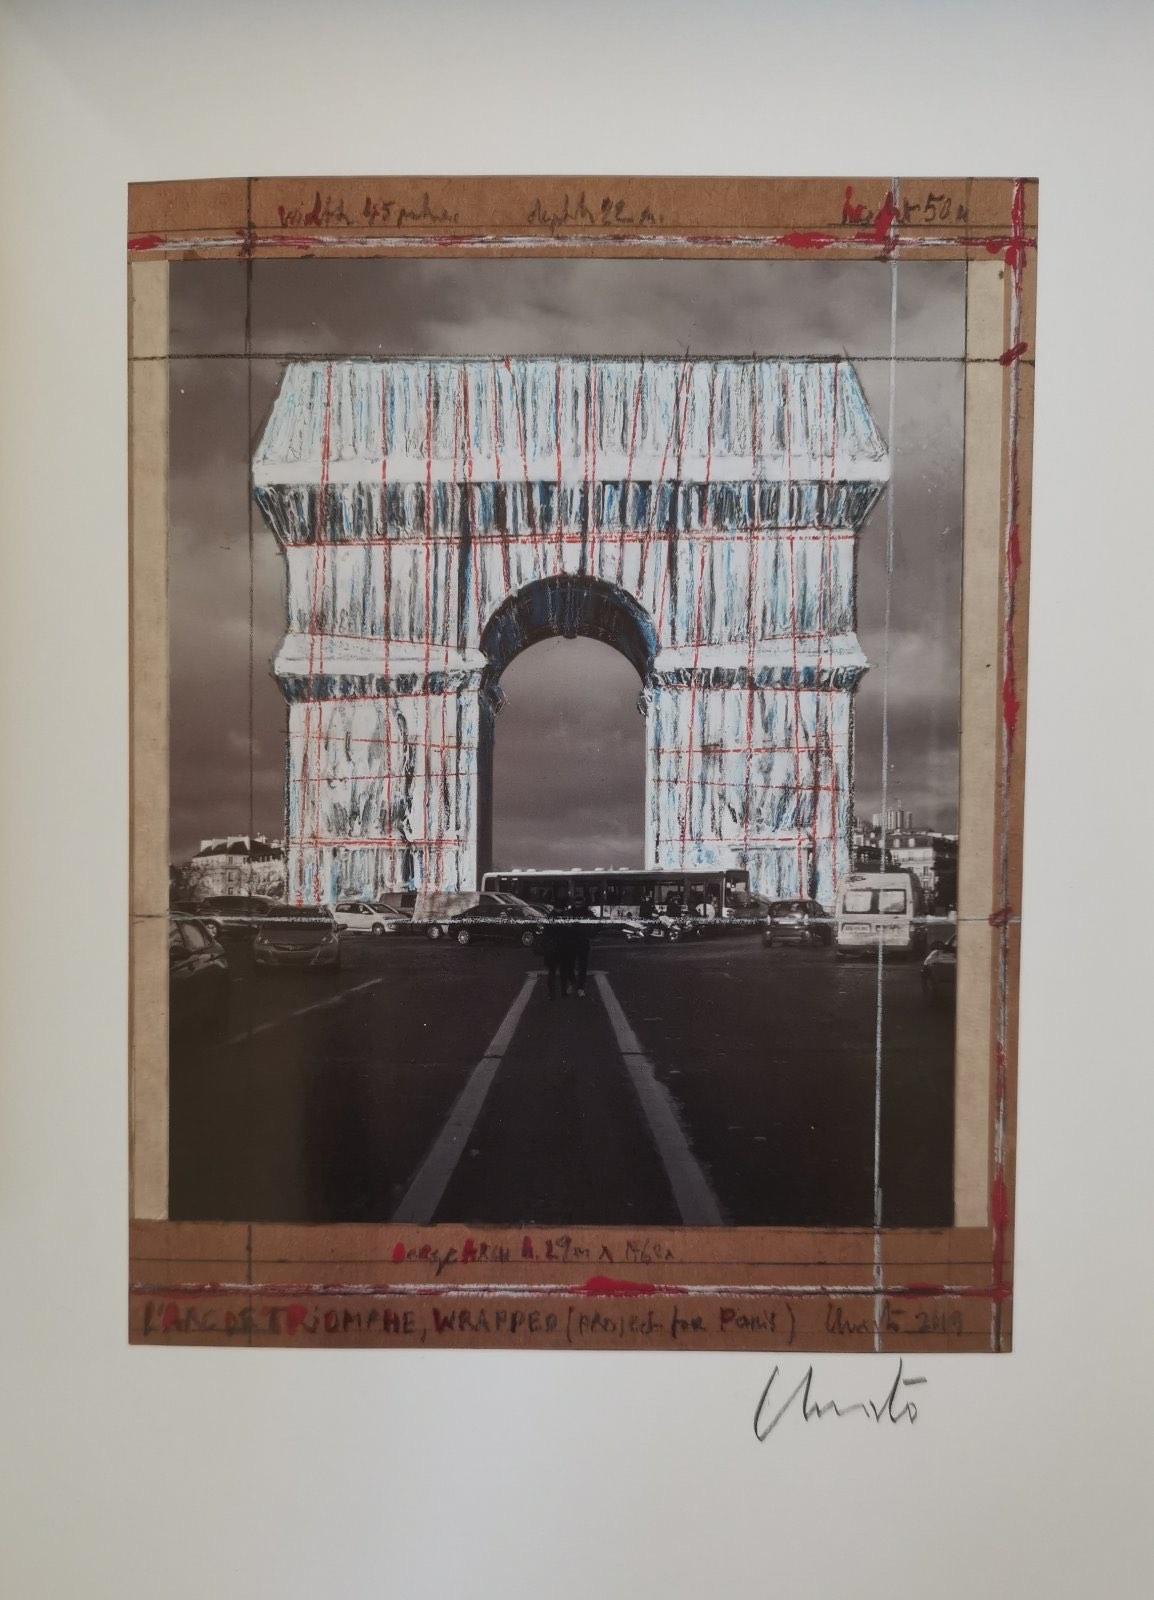 Print of L'Arc de Triomphe wrapped project signed by the artist Christo Javacheff .
Sheet: 45 x 35 cm
USA 2019.